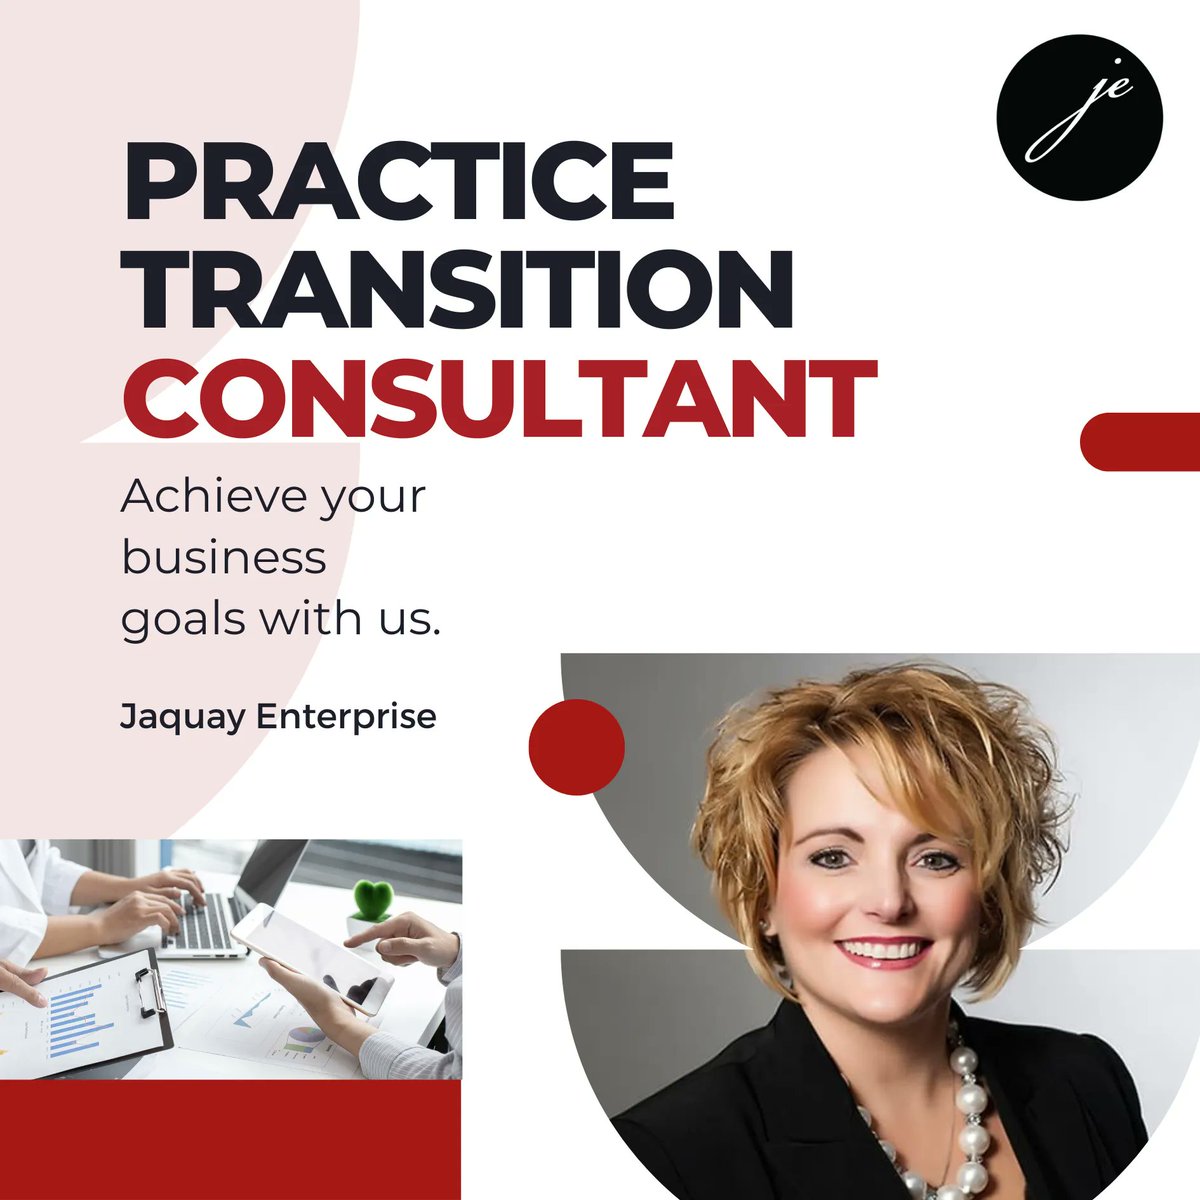 As Practice Transition Advisors, we are dedicated to empowering professionals like you to soar to new heights and accomplish your business objectives.

#PracticeTransitionConsultants #JaquayEnterprise #UnleashYourPotential #BusinessGoalsAchieved #CollaborateToSucceed